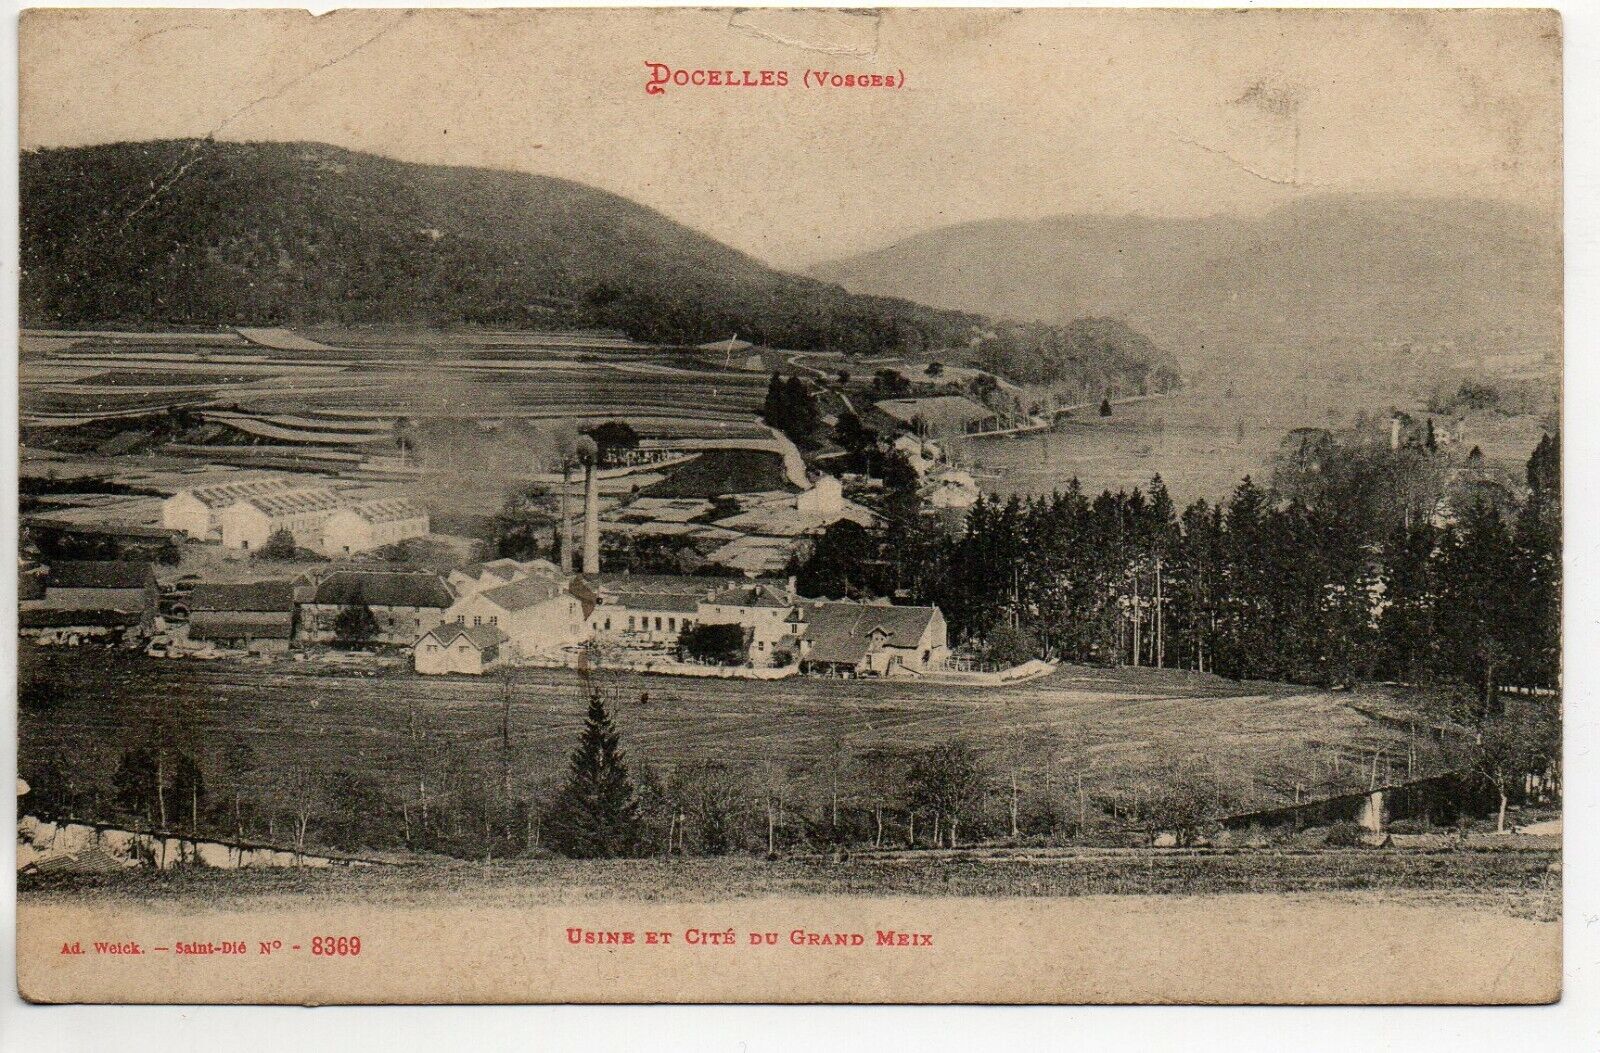  DOCELLES Vosges CPA 88 view of the FACTORIES and city of the Grand Meix